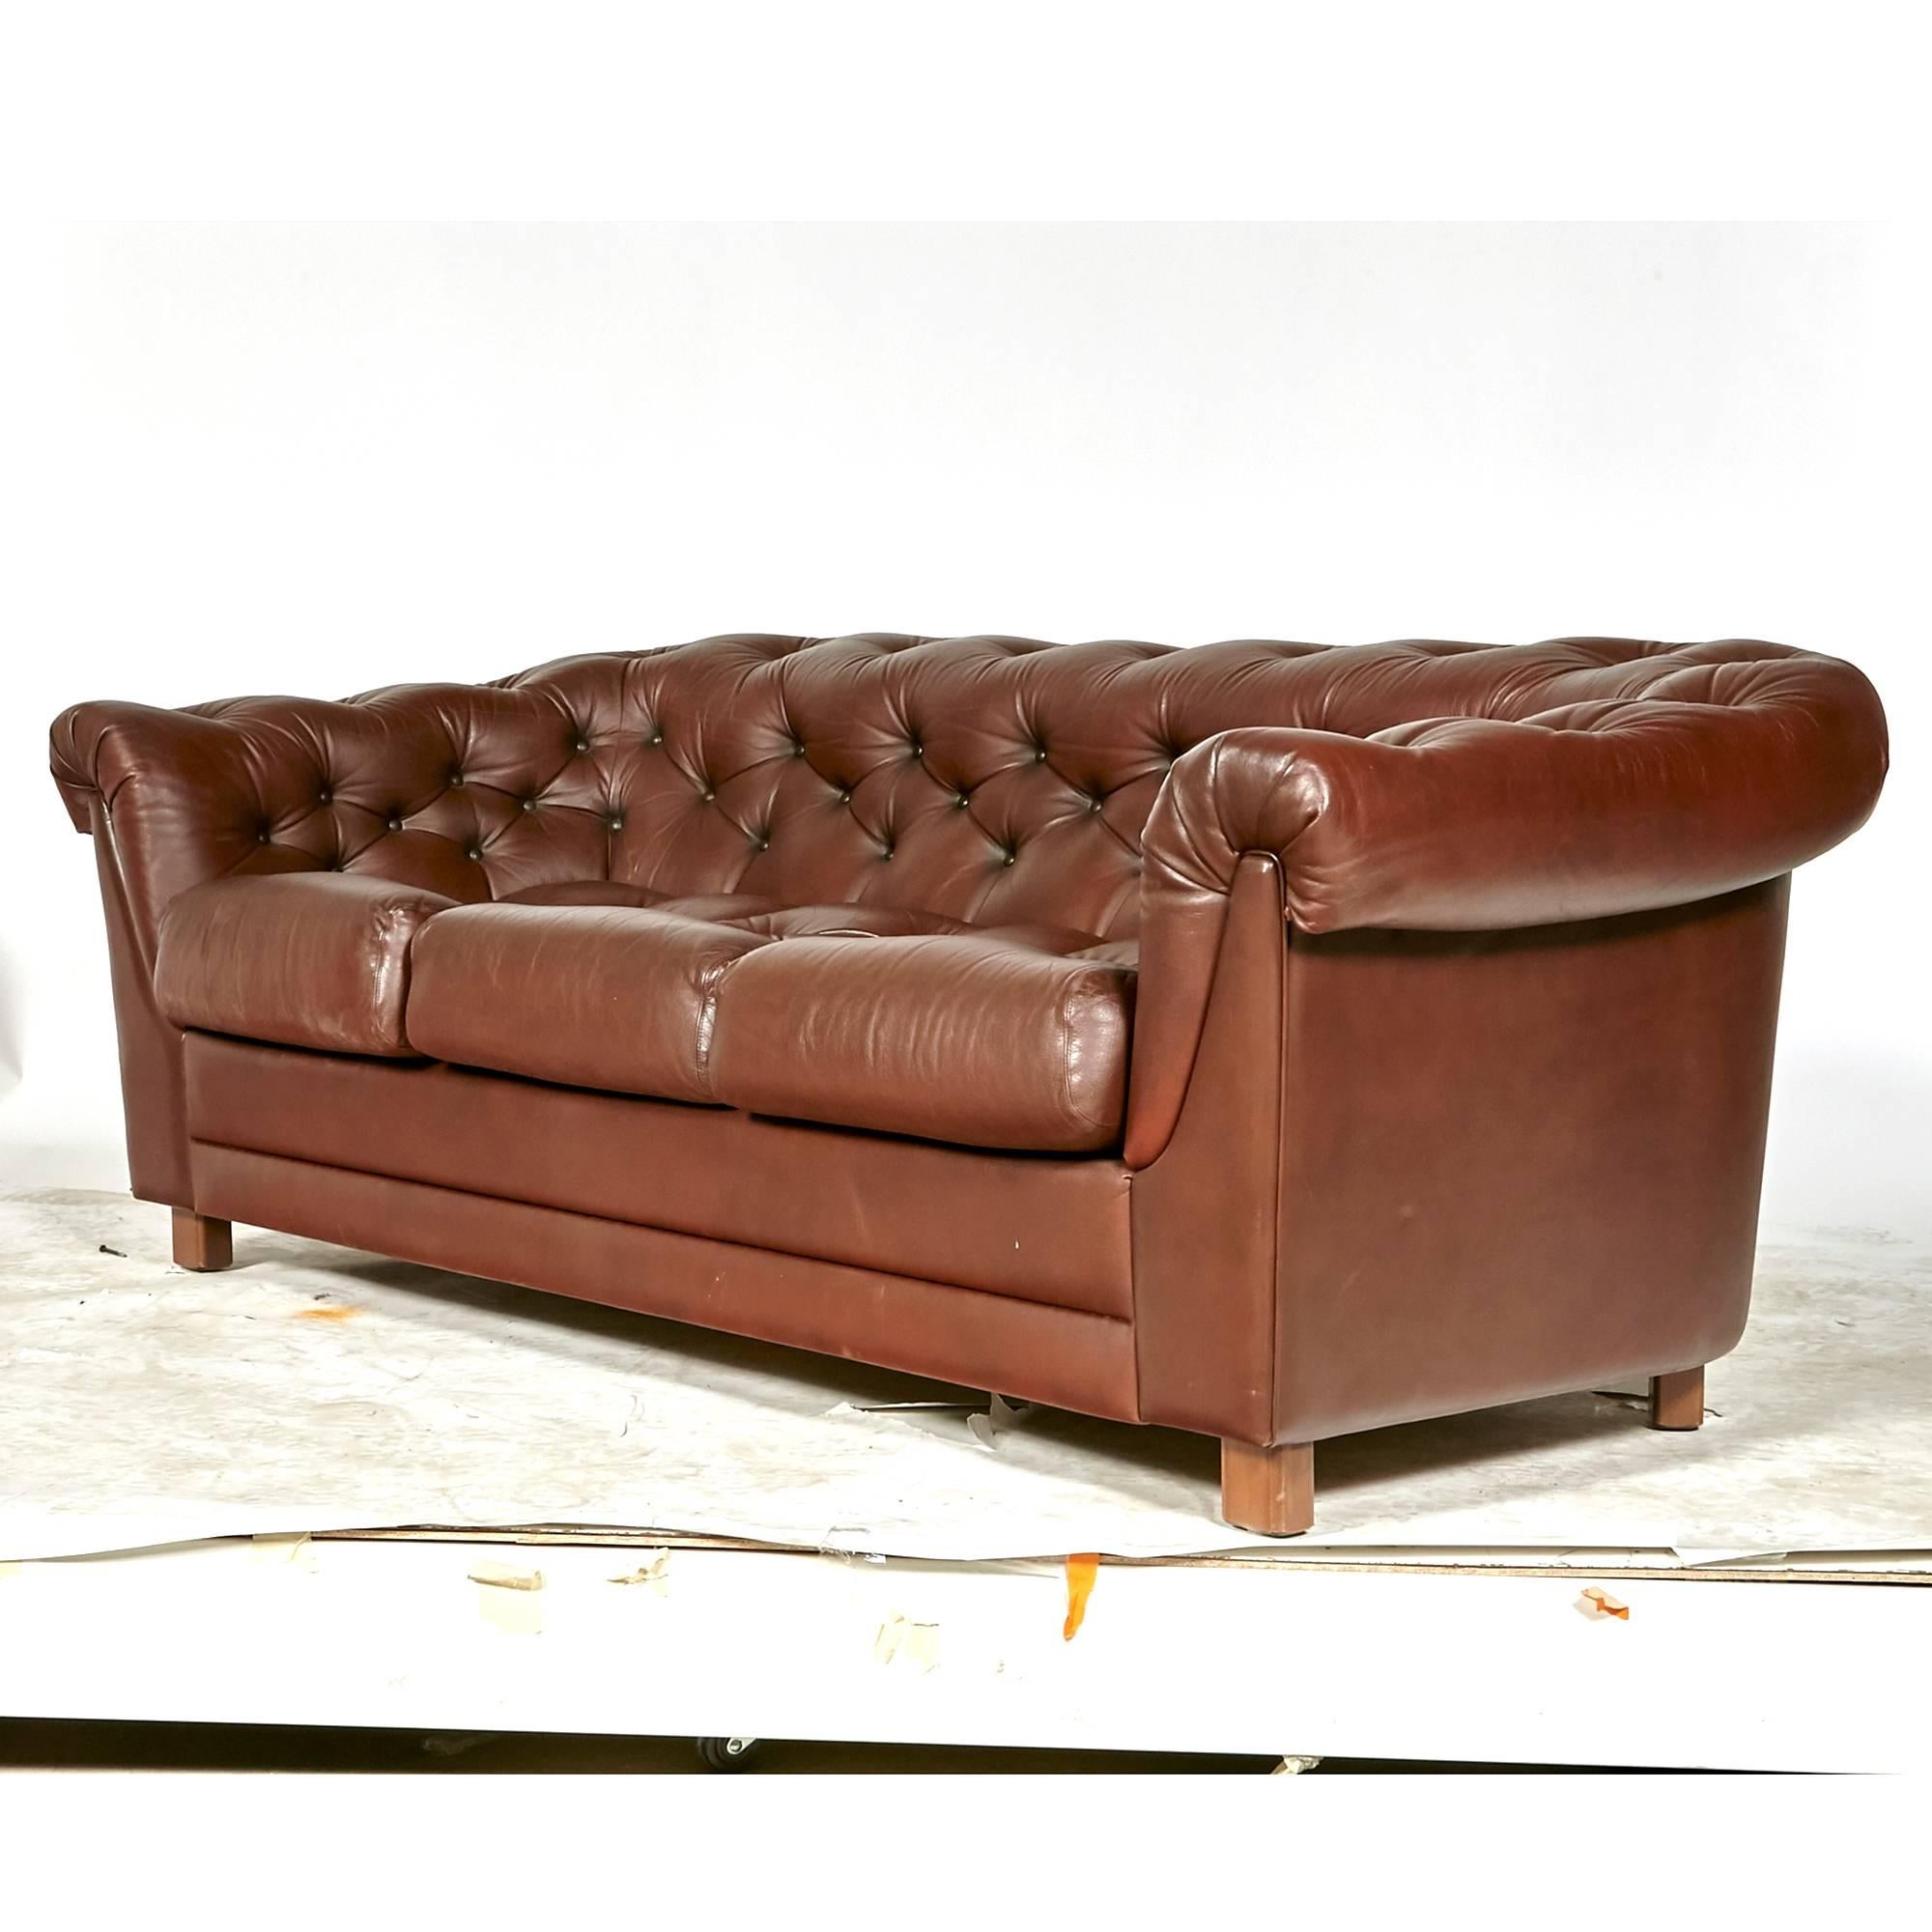 Brown Leather Chesterfield Sofa In Excellent Condition For Sale In Amherst, NH